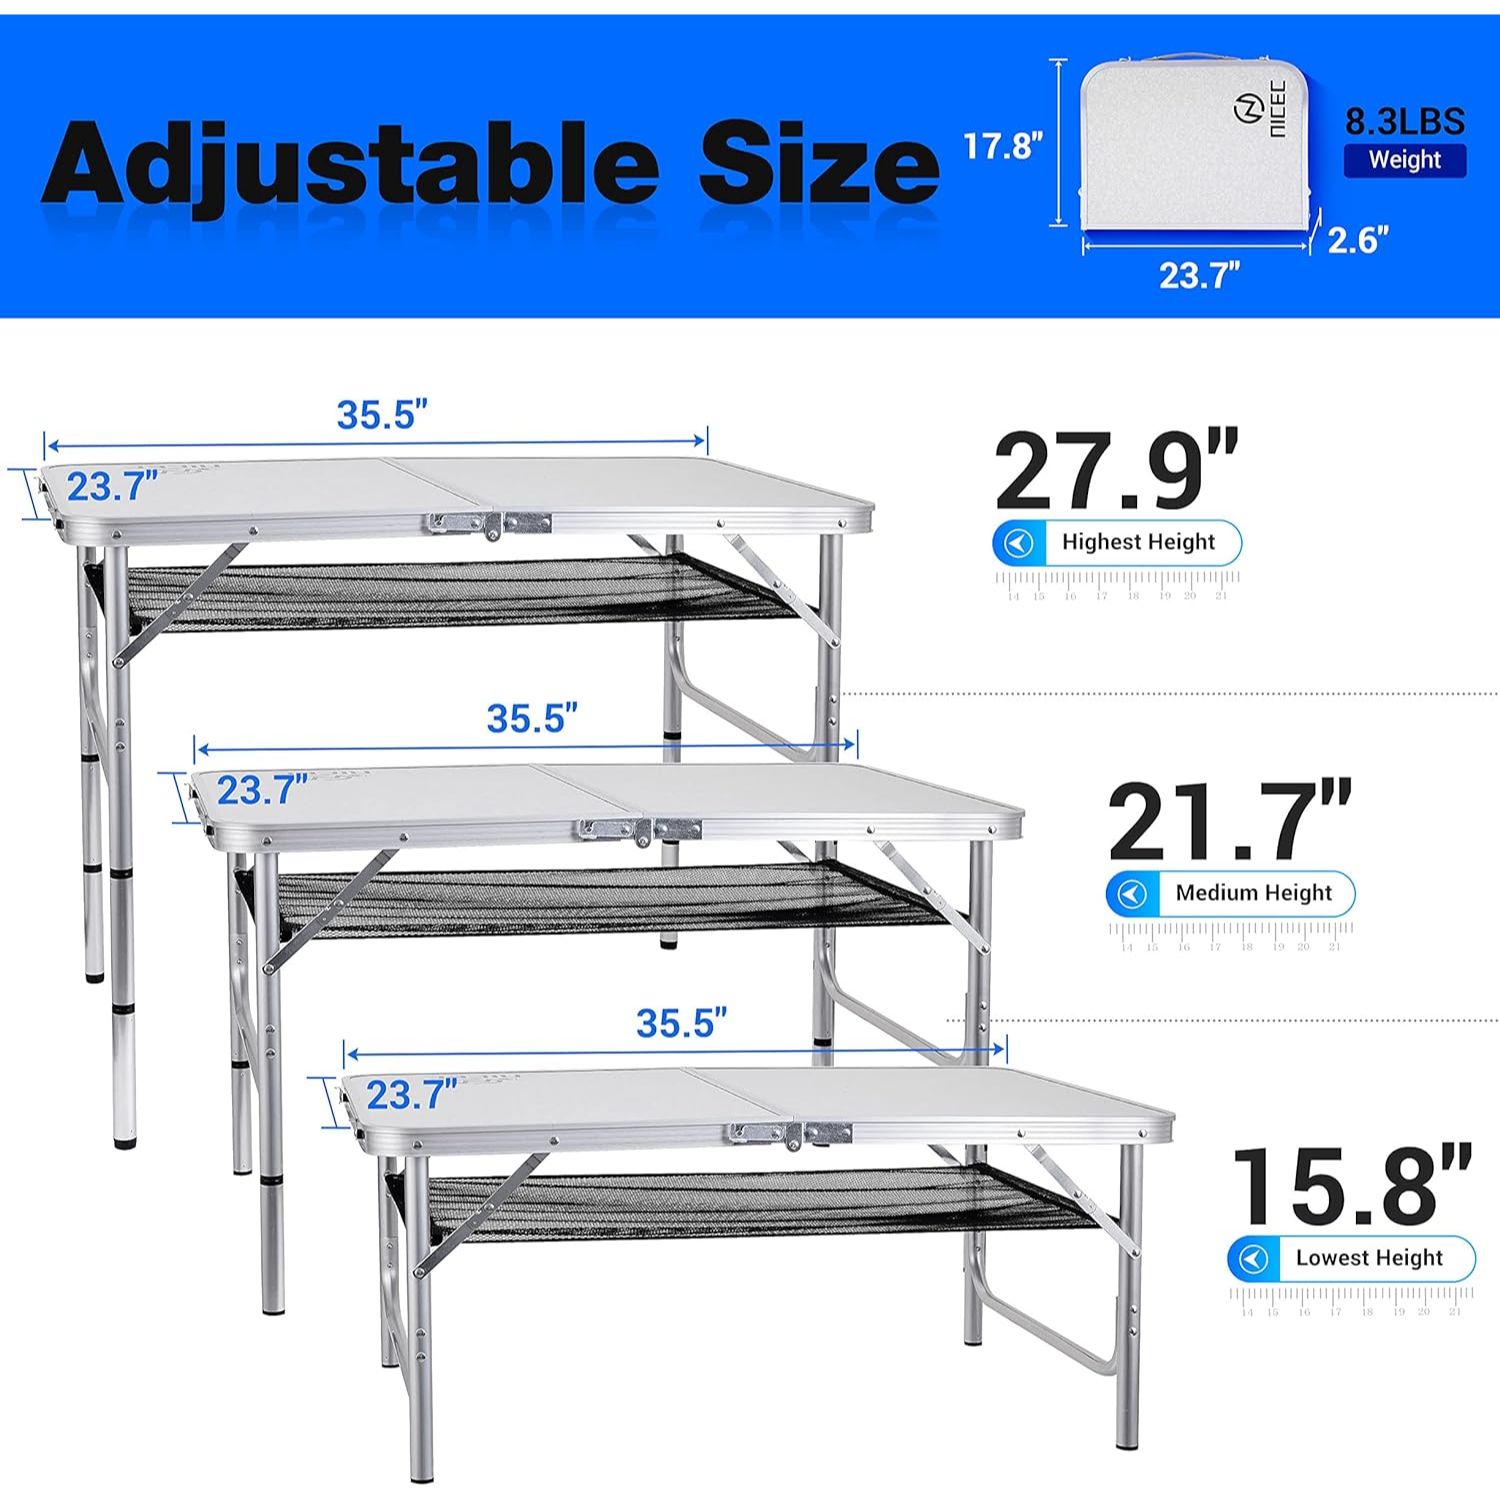 

Versatile Adjustable Height Lightweight Aluminum Folding Table With Carry Handle For Indoor, Outdoor, Camping, Beach, And Office Use